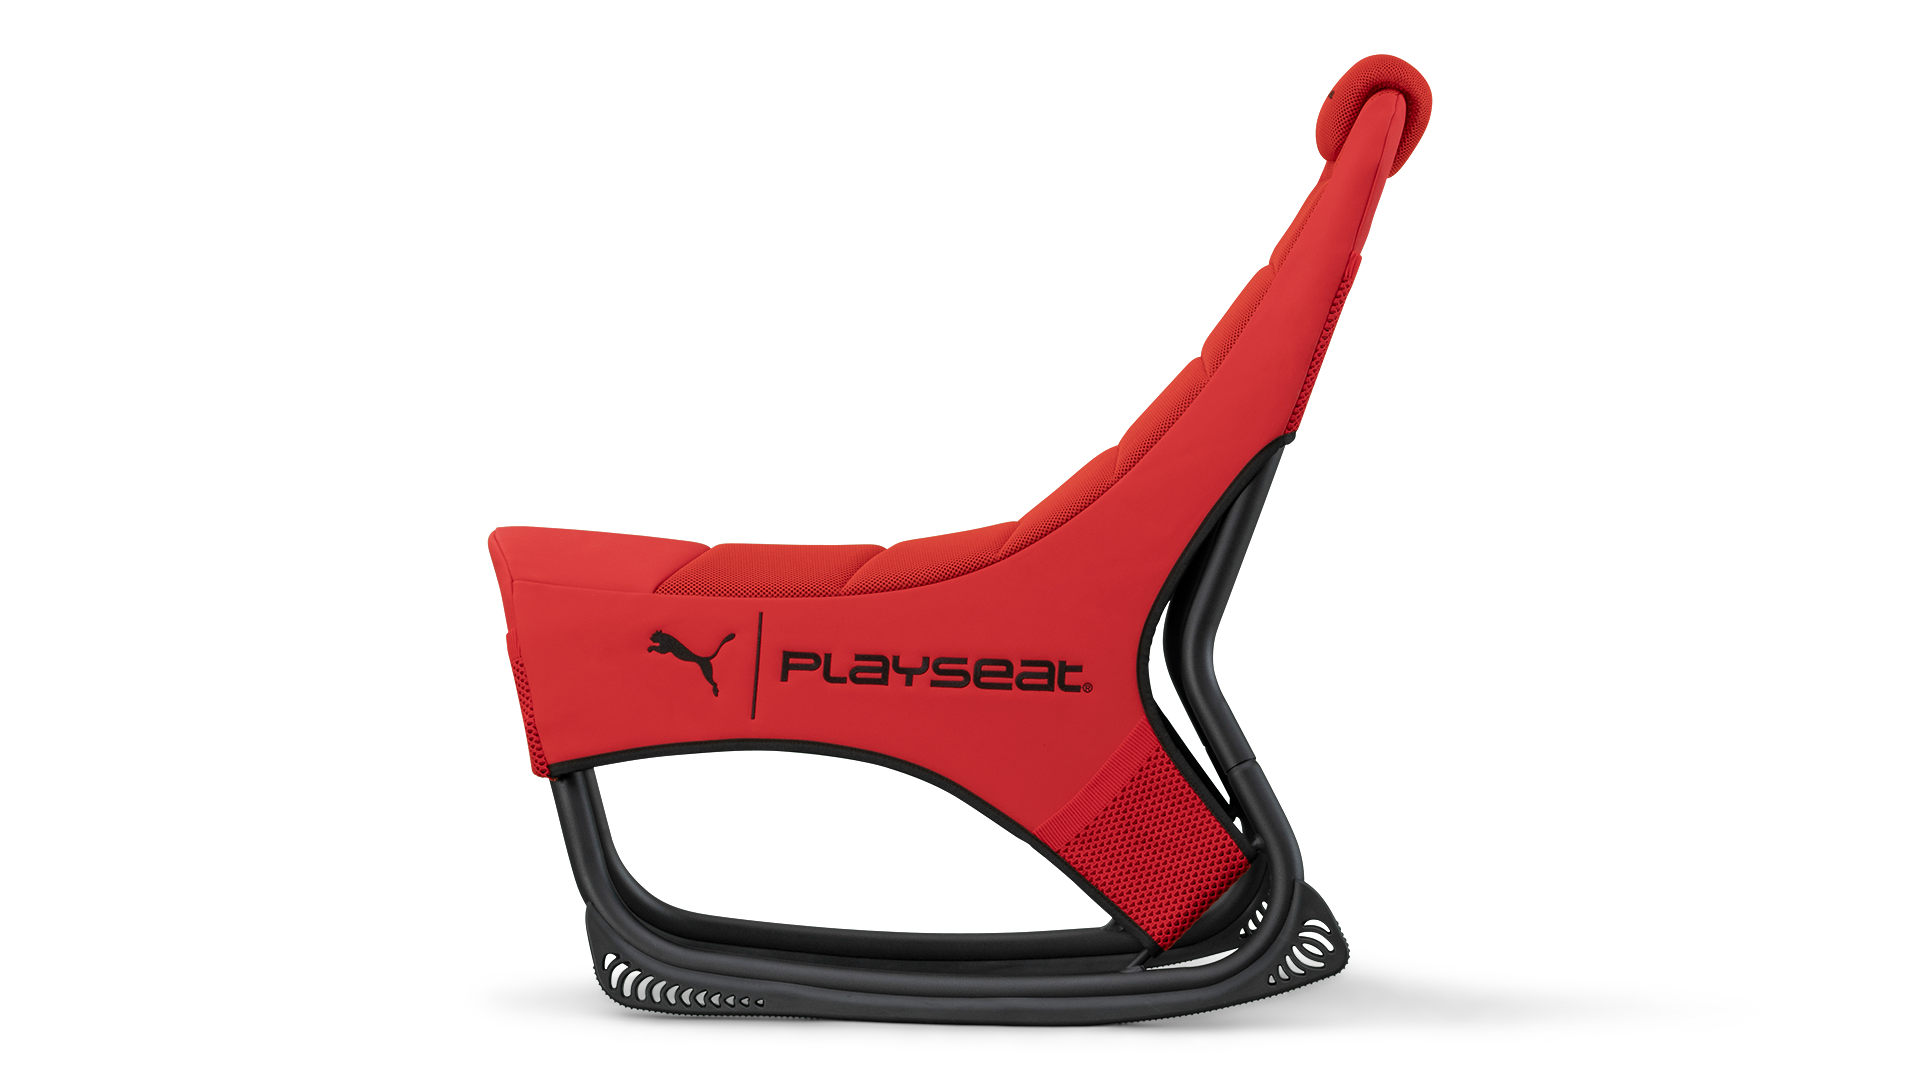 playseat-go-puma-active-red-gaming-seat-side-view-1920x1080.png